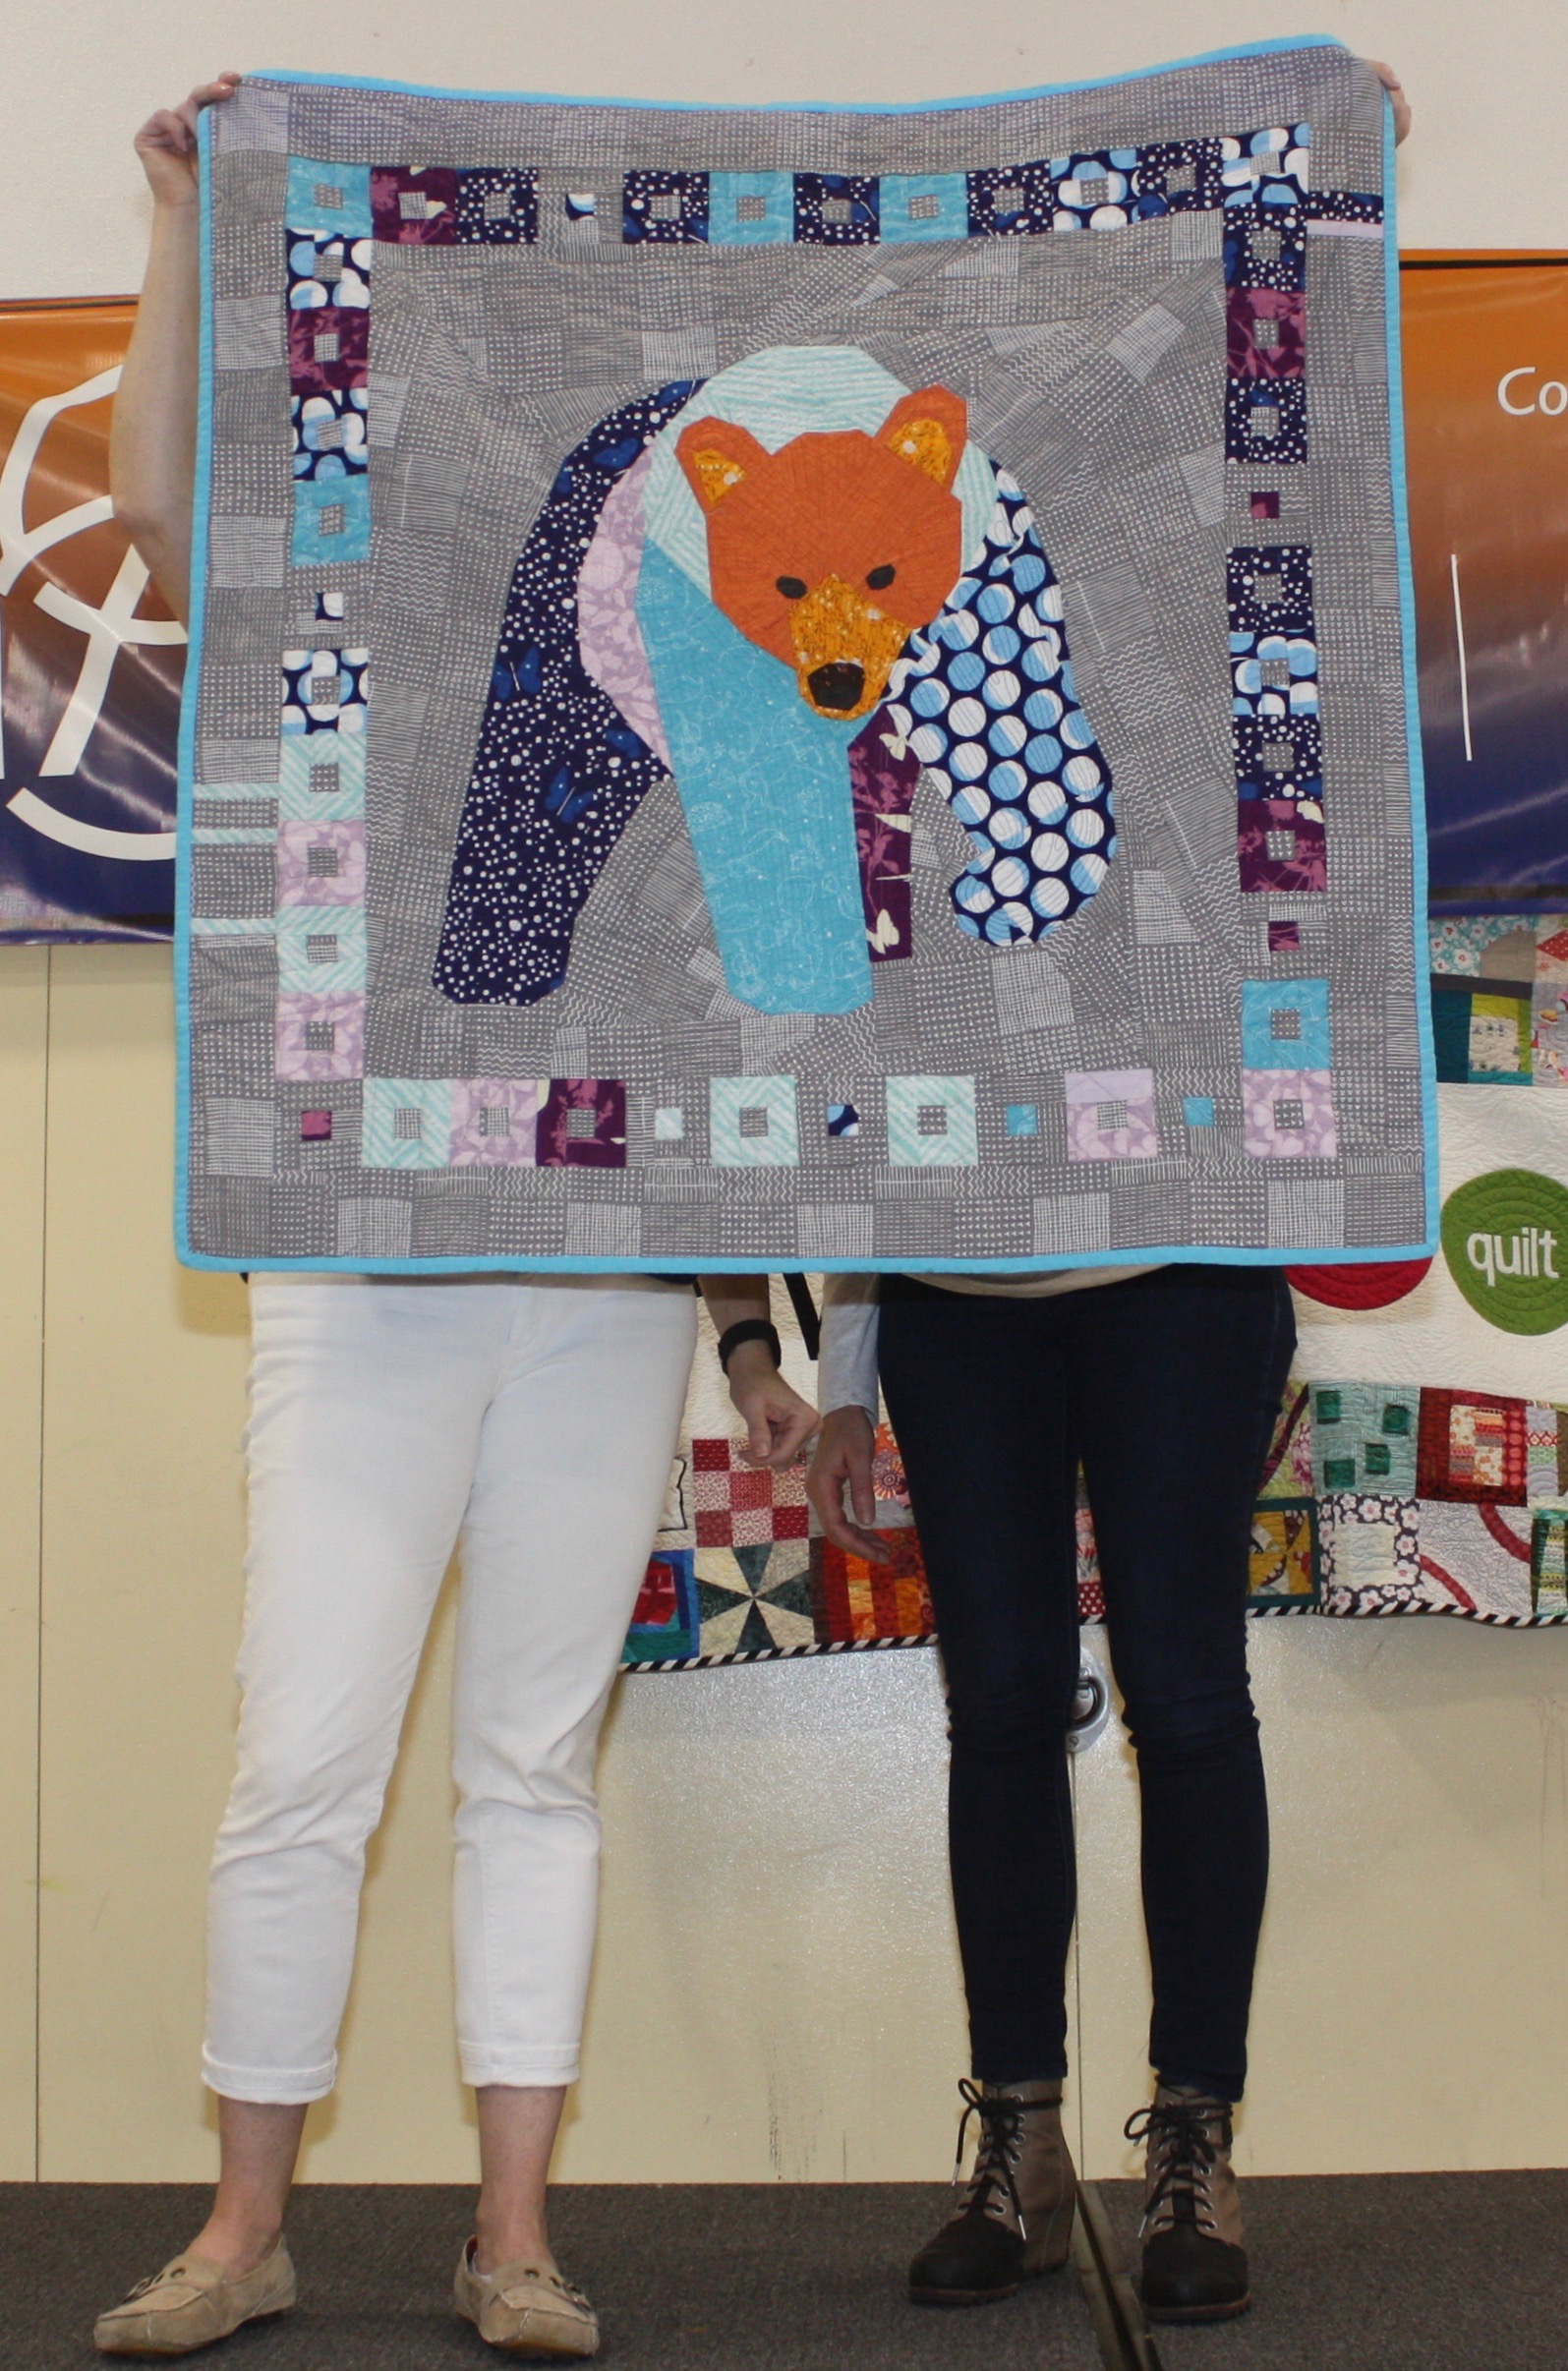  Mims  Big Bear  The center is a paper-piecing pattern by Tartan Kiwi  @mimsical13 